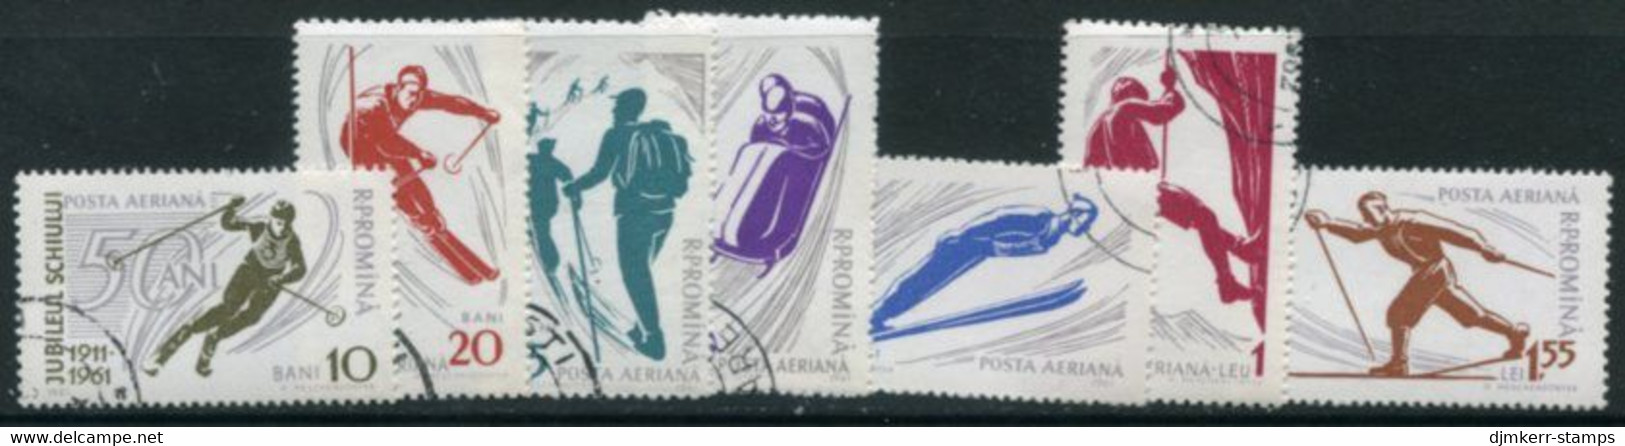 ROMANIA 1961 Winter Sports Perforated Used.  Michel 1951-57 - Gebraucht